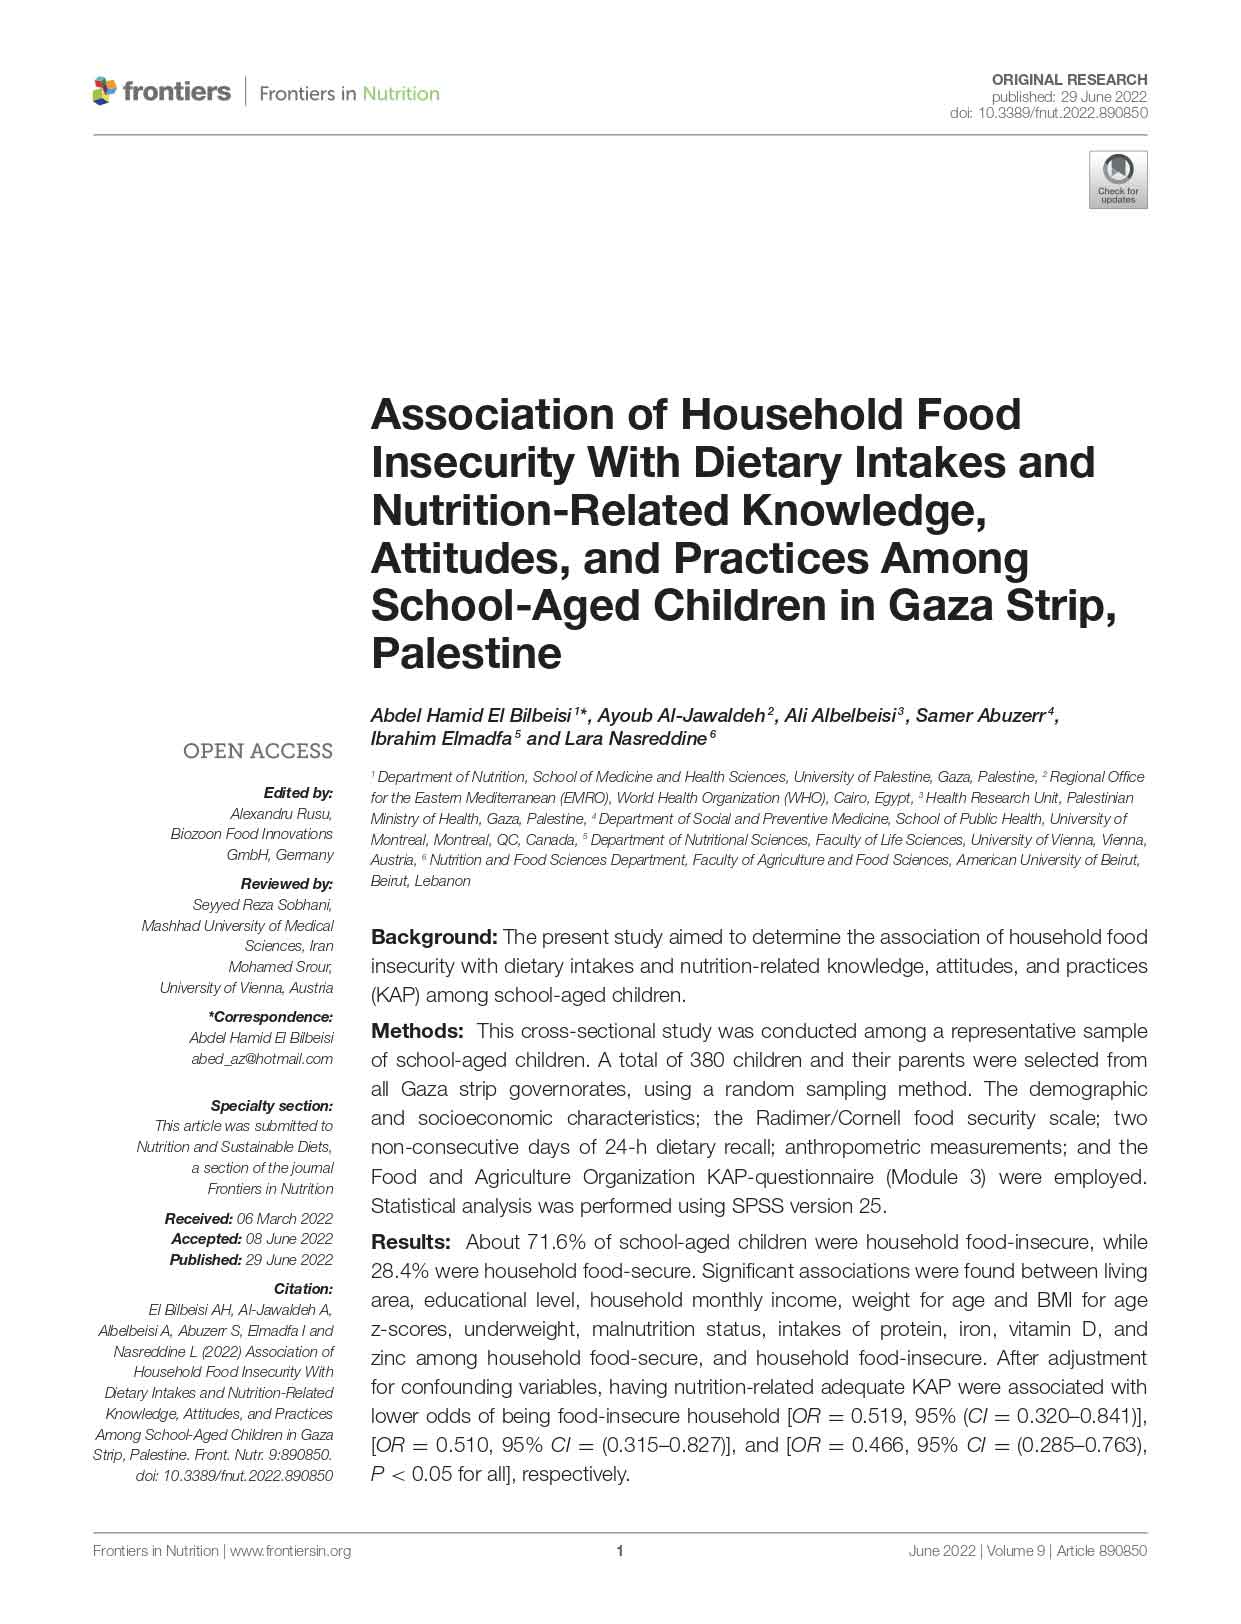 Association of household food insecurity with dietary intakes and nutrition-related knowledge, attitudes, and practices among school-aged children in Gaza strip, Palestine